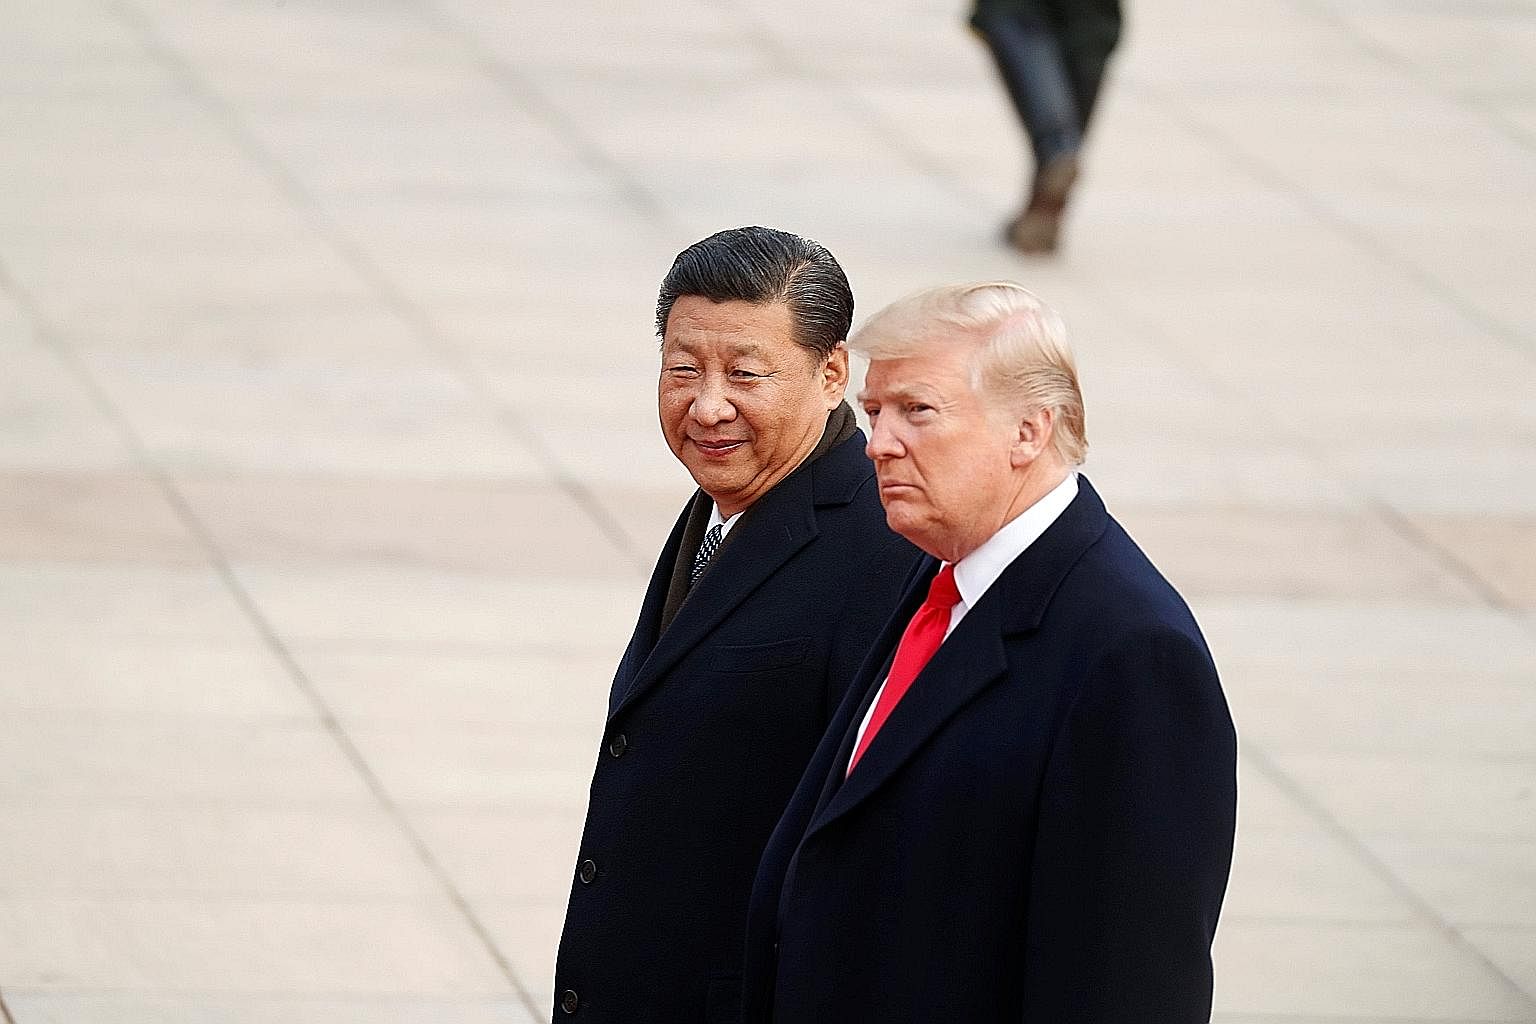 US President Donald Trump with his Chinese counterpart Xi Jinping during a visit to Beijing last year. Geopolitical analyst Ian Bremmer expects to see Mr Trump take a harder line on China with a series of tougher trade moves.